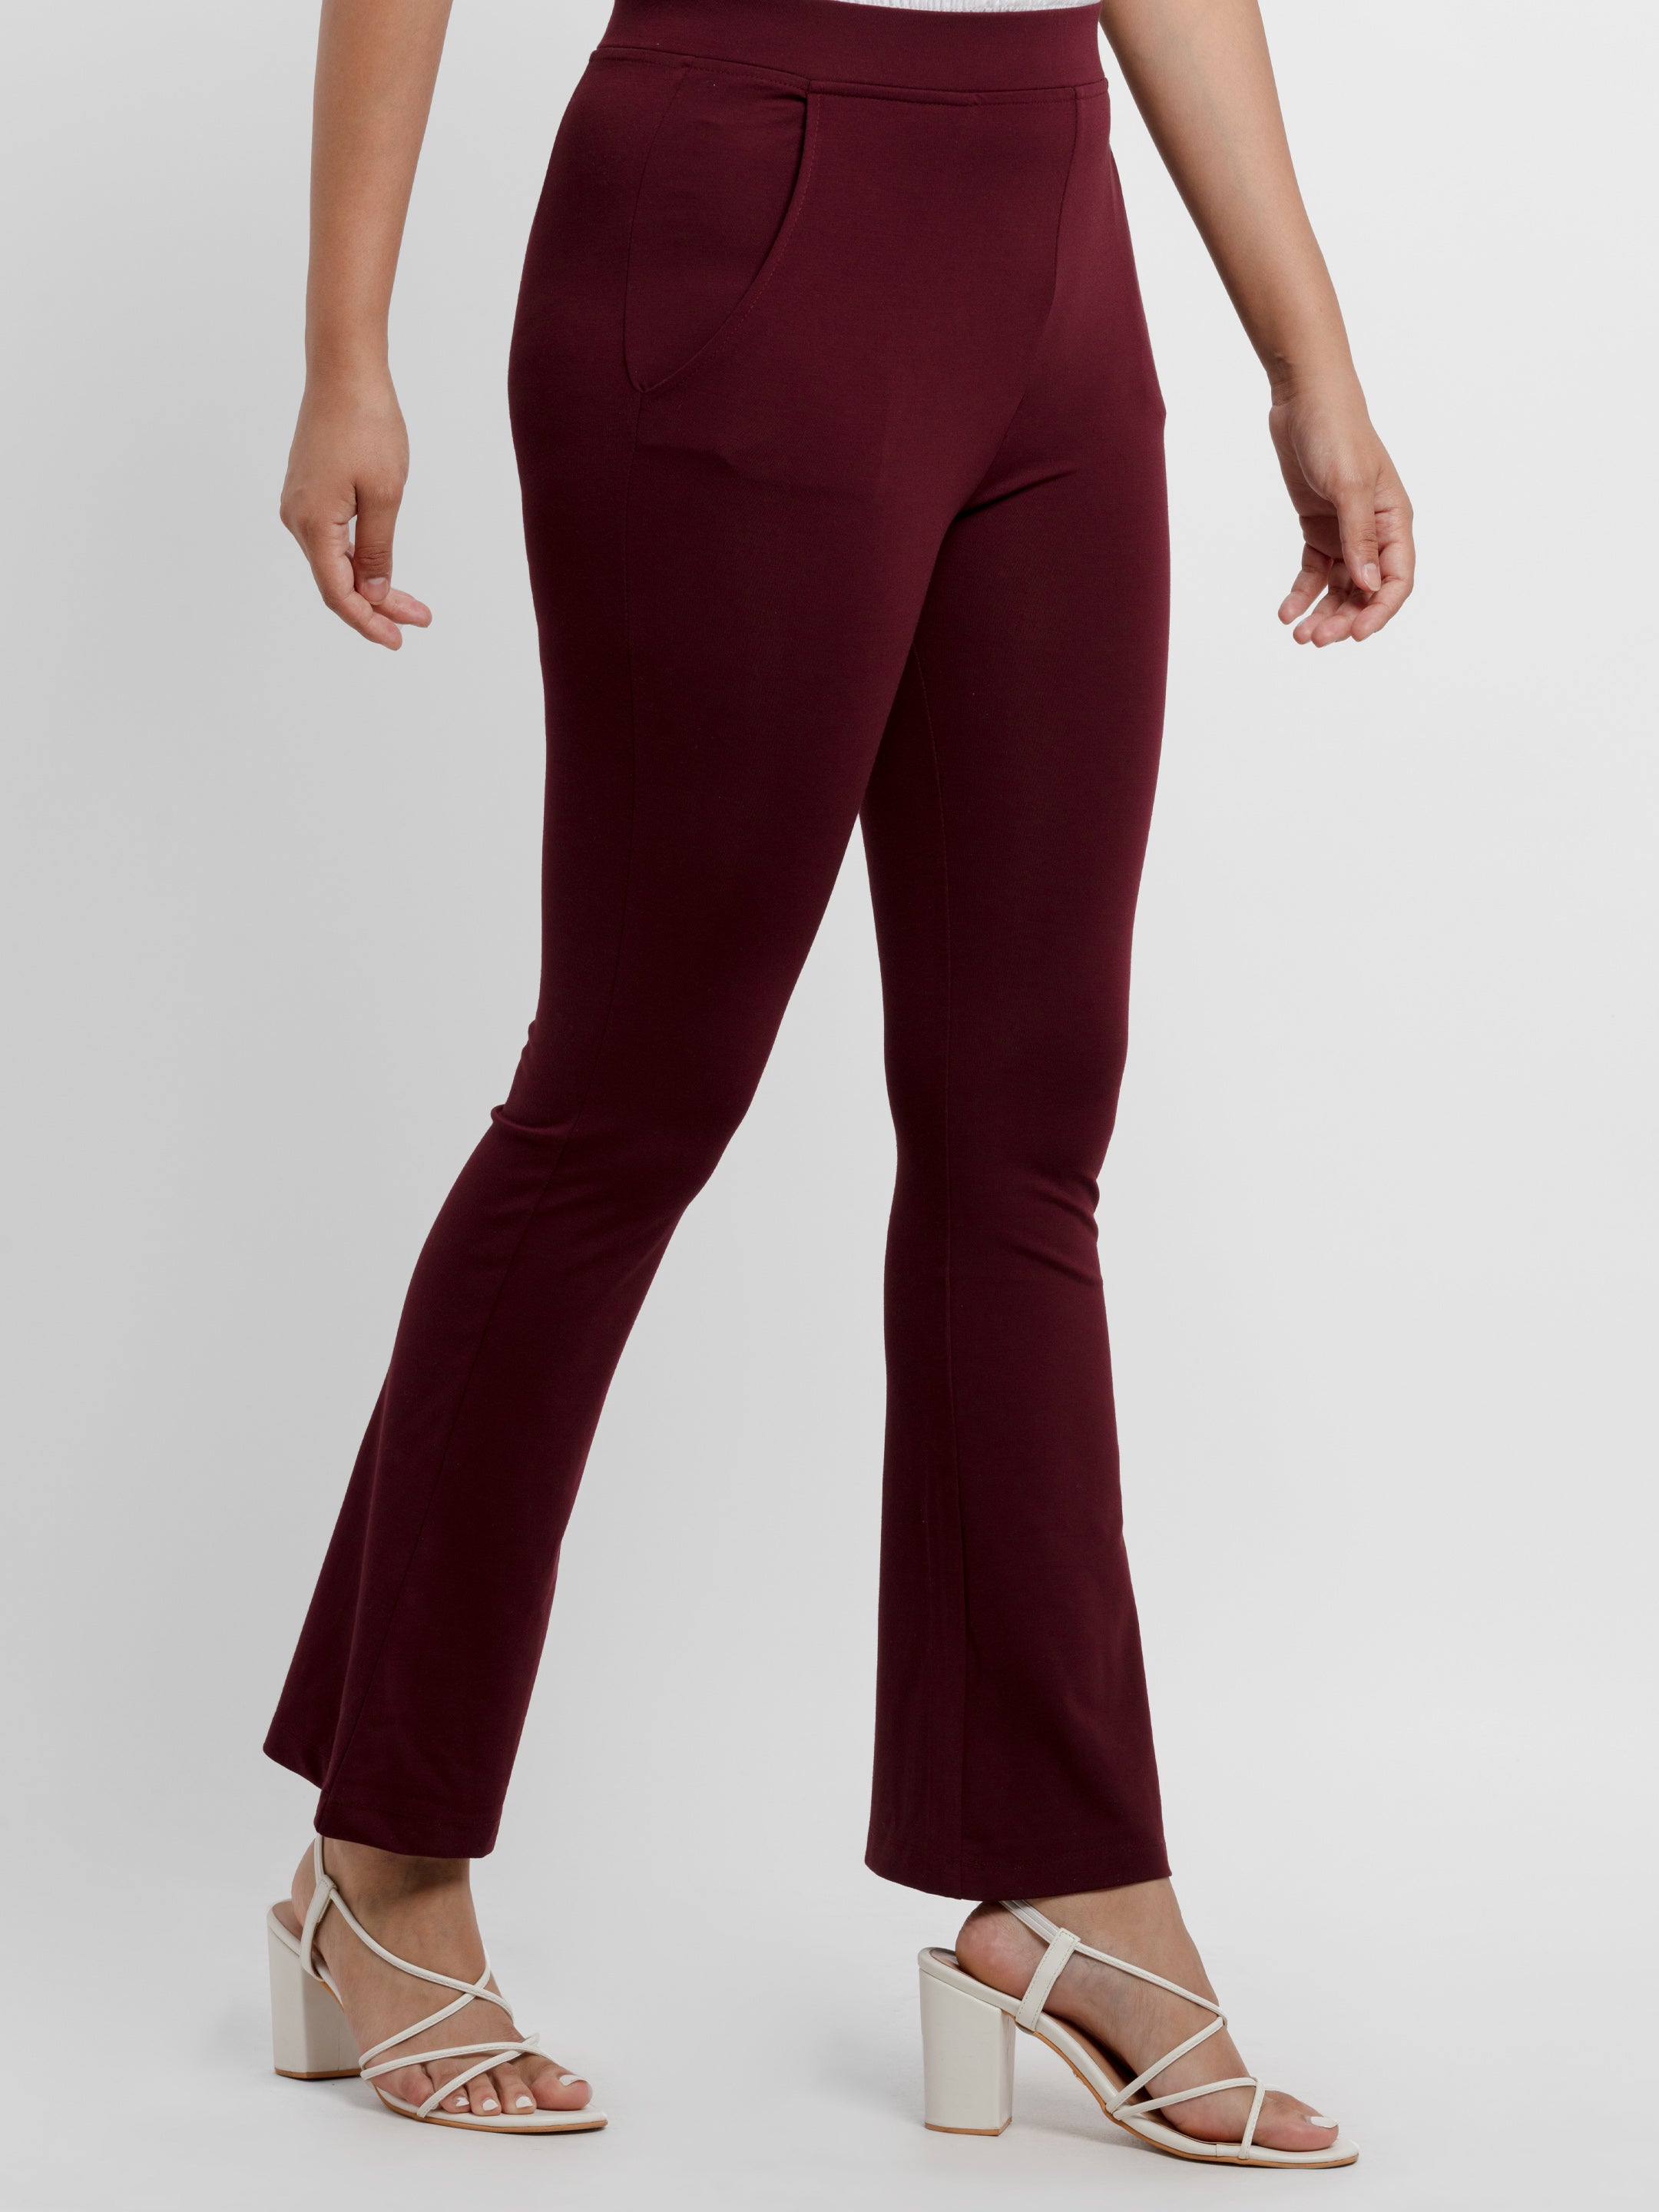 8 Types of Jeggings You Really Need To Check Out - Baggout